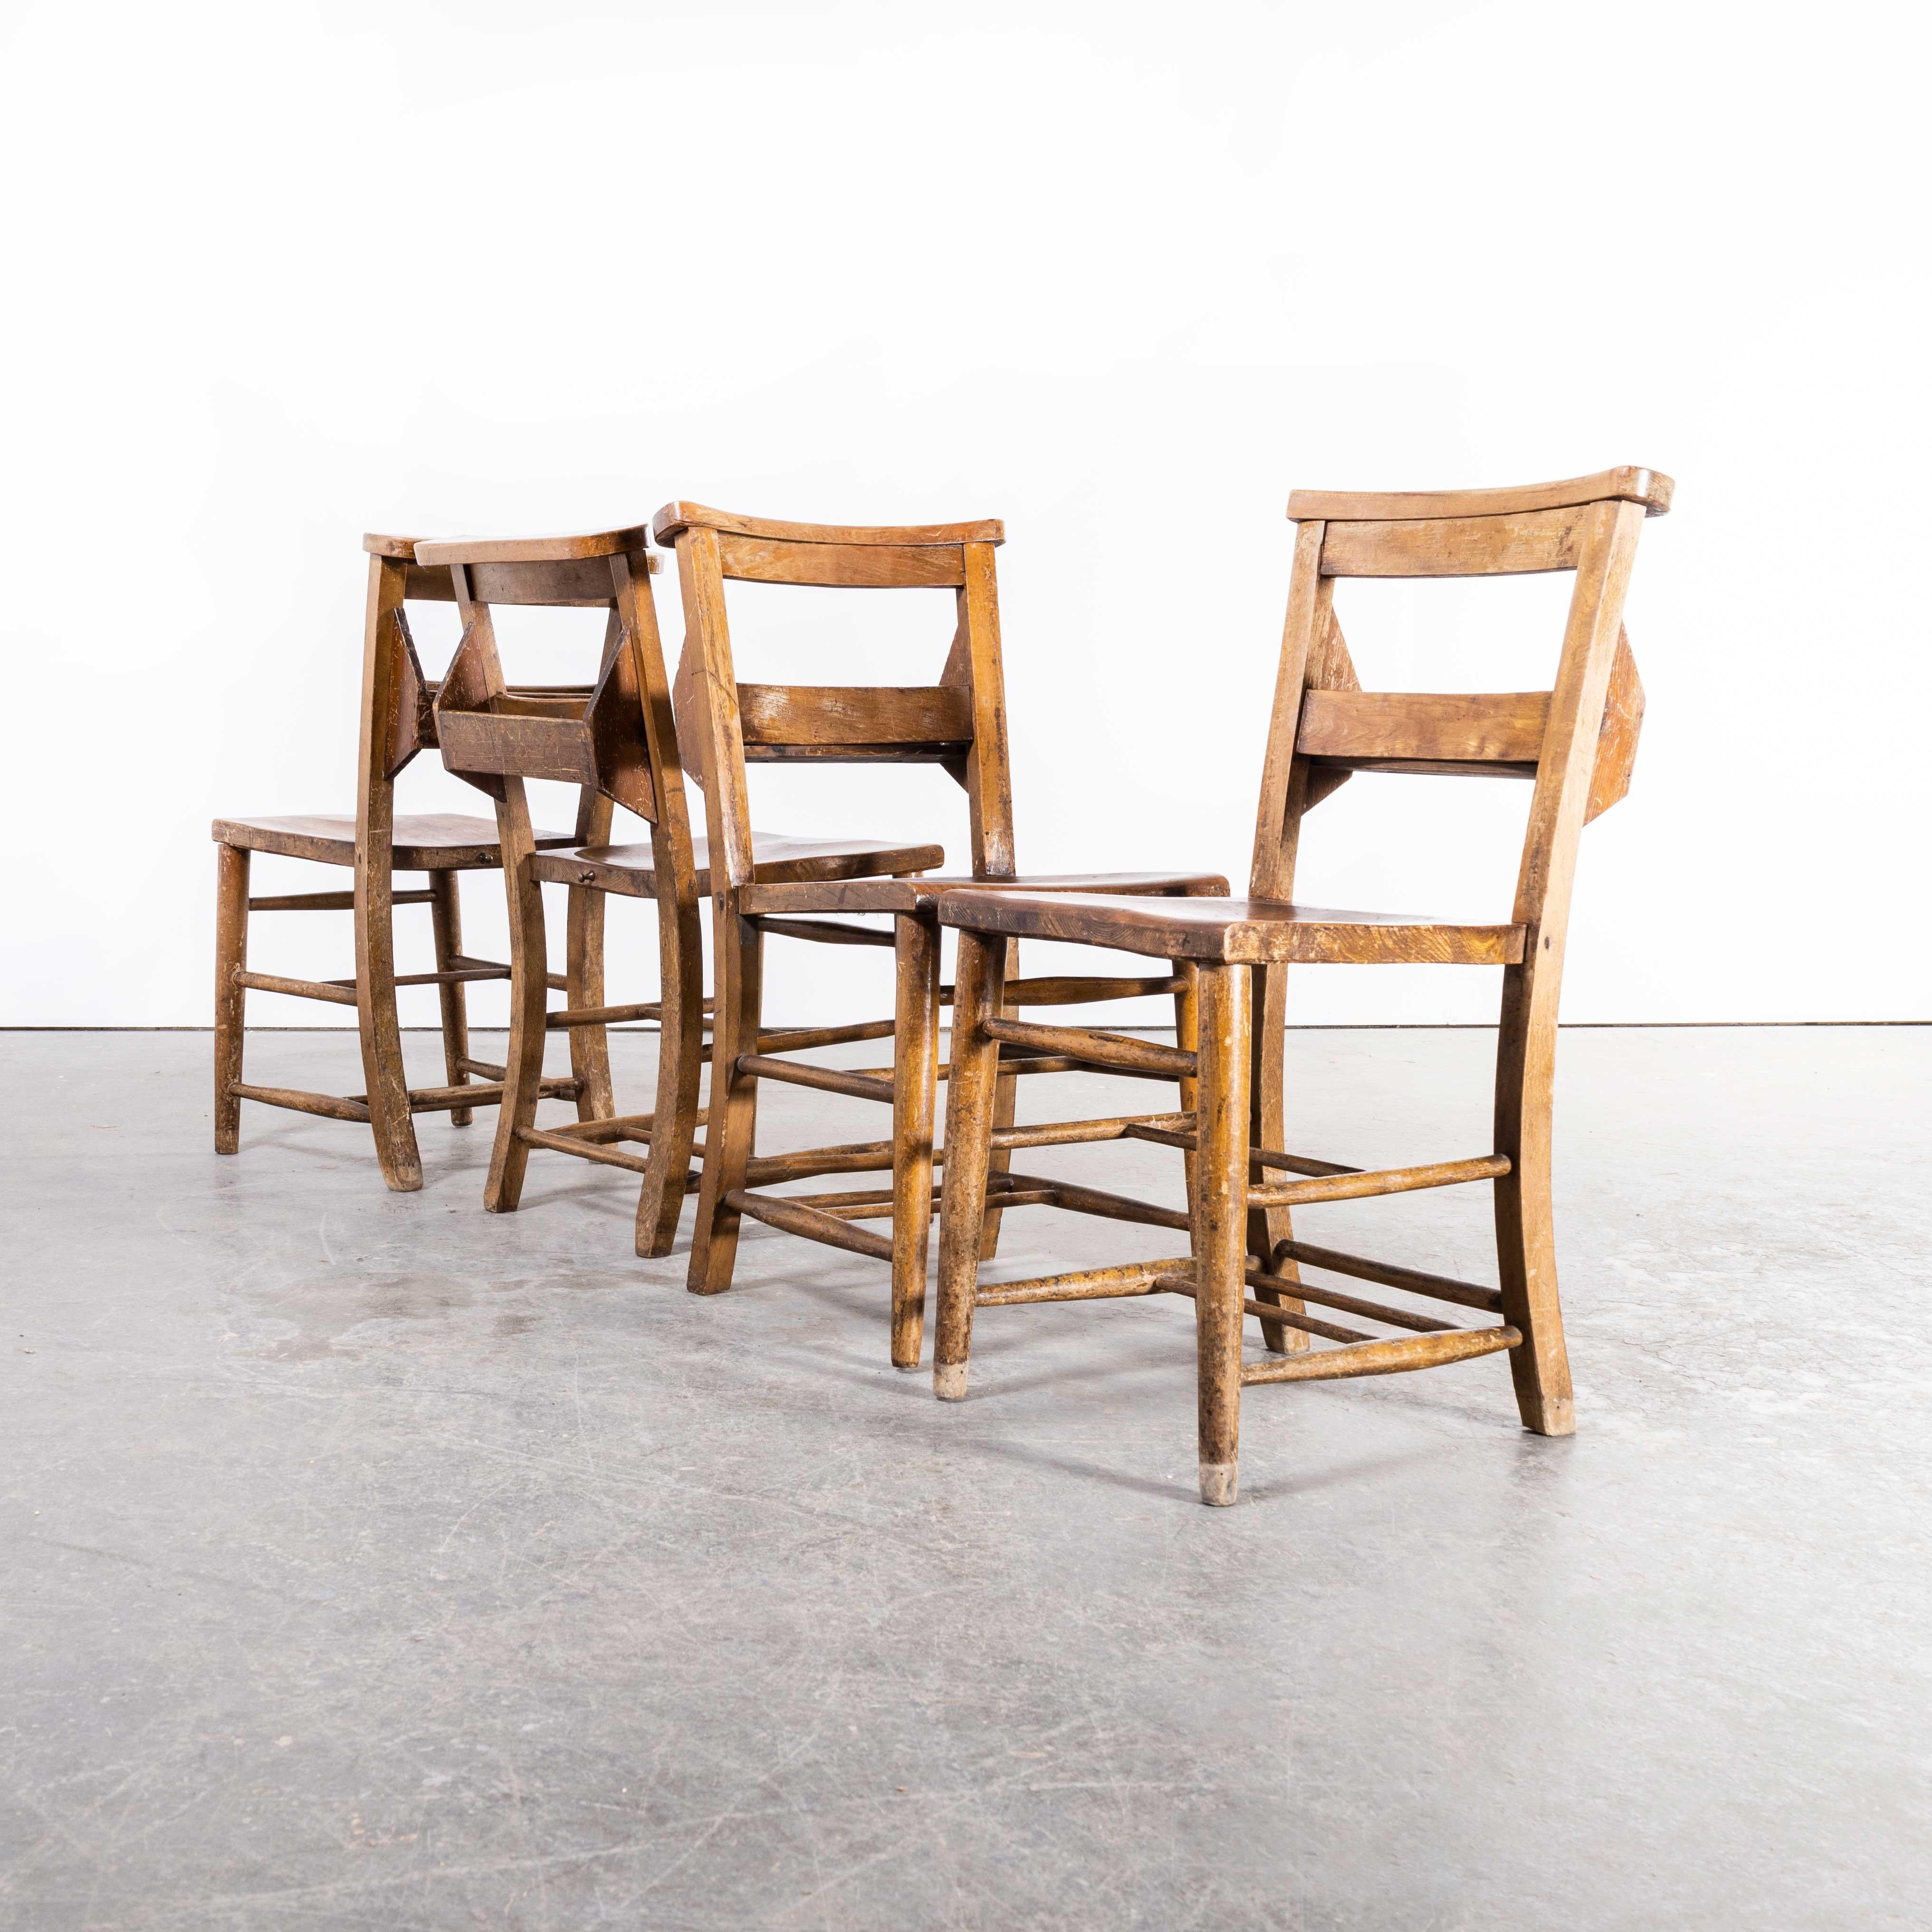 1940’s Ash Church – chapel dining chairs – set of four
1940’s Ash Church – chapel dining chairs – set of four. England has a wonderfully rich heritage for making chairs. At the height of production at the turn of the last century over 4500 chairs